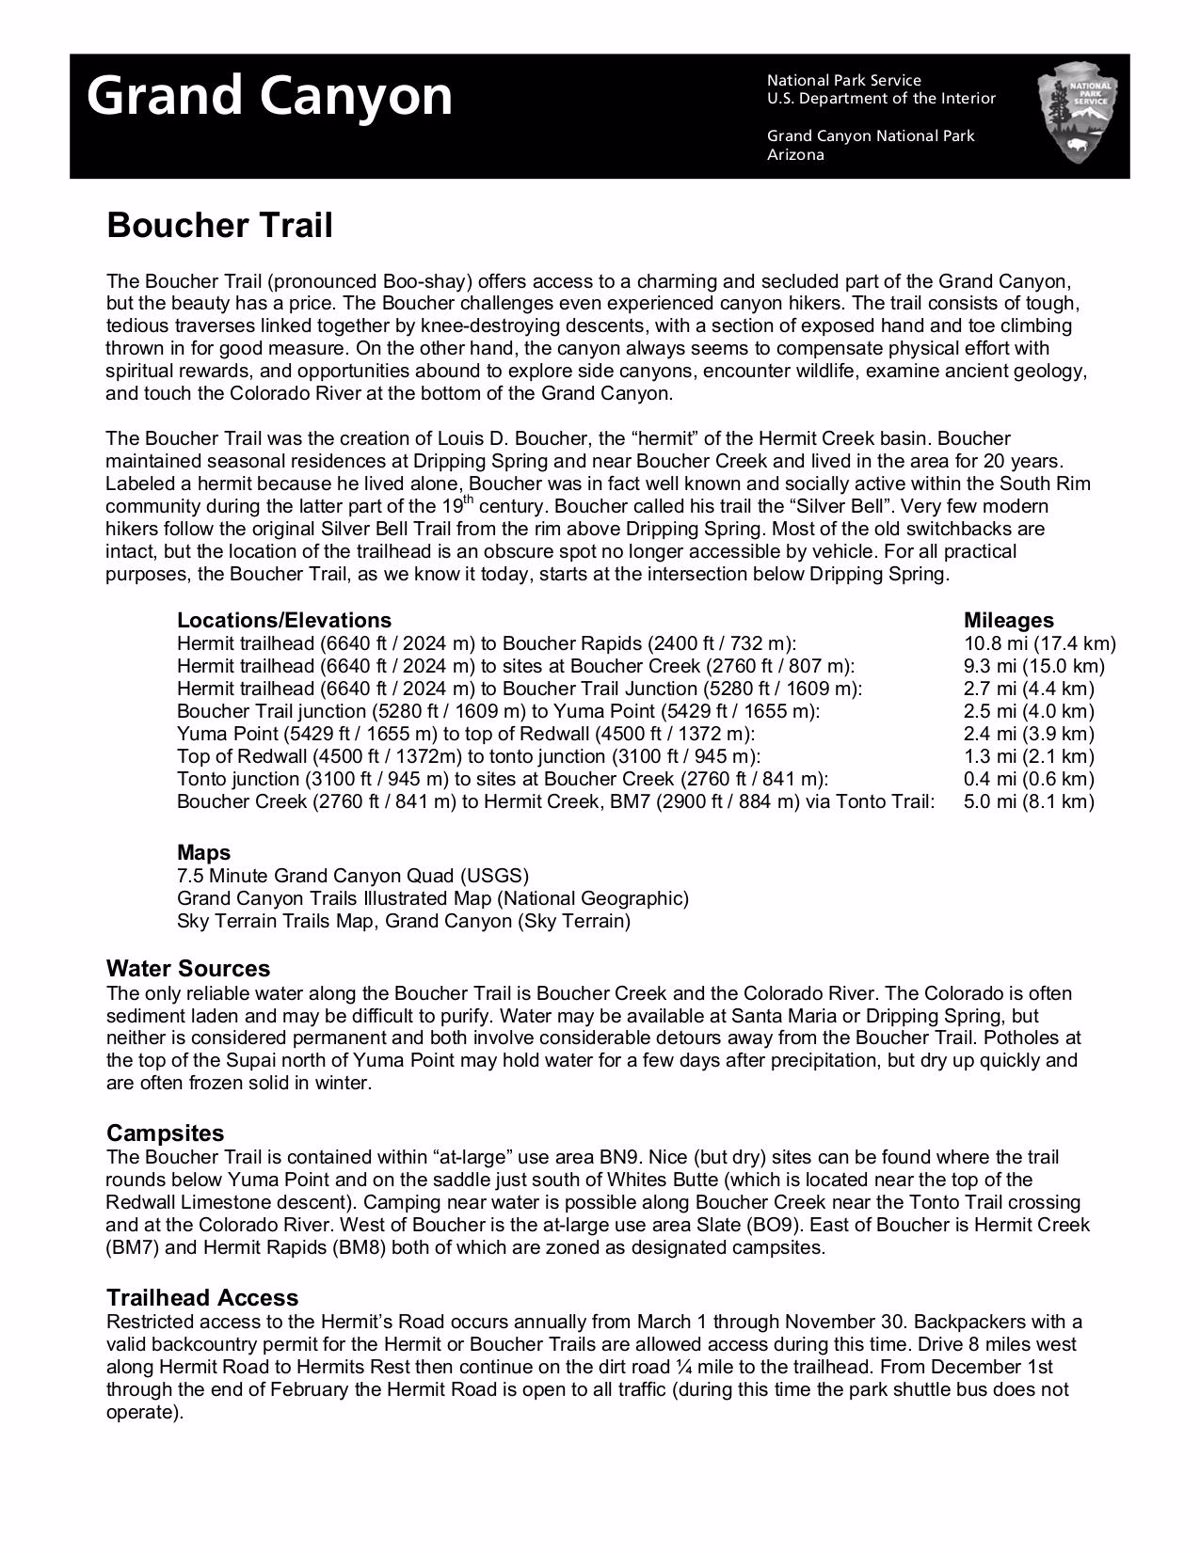 Grand Canyon National Park - Boucher Trail PDF Cover Page